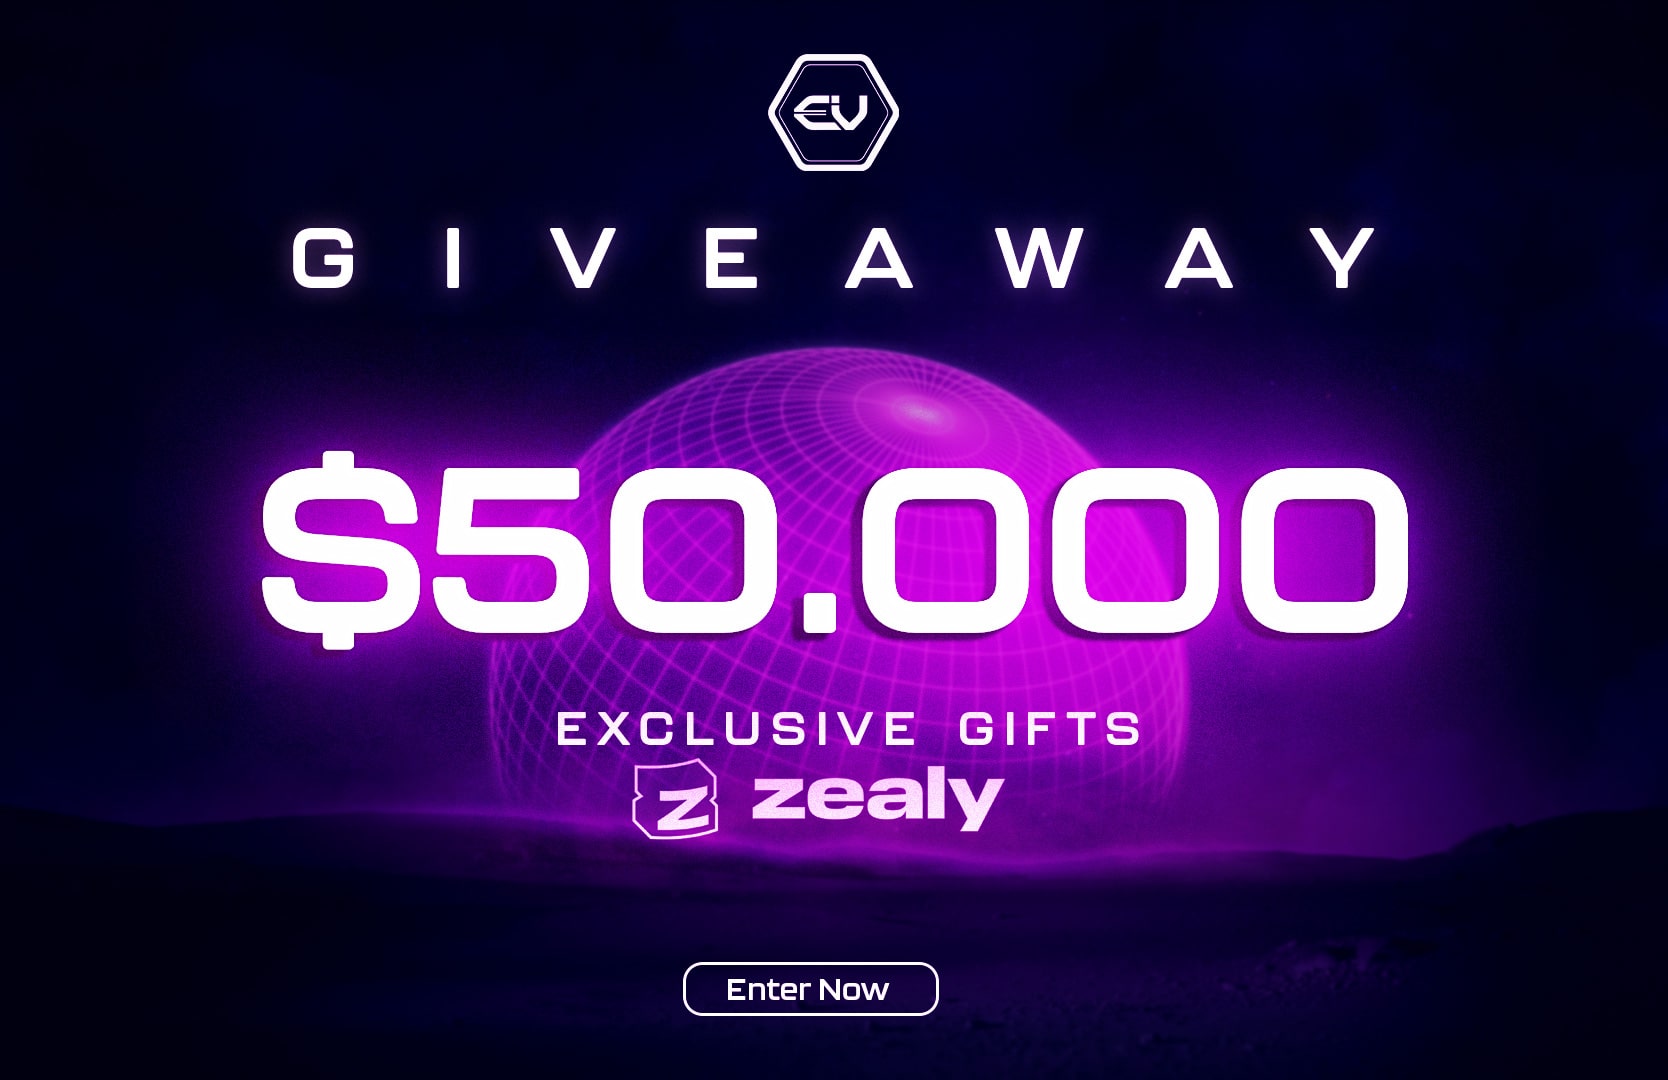 Earniverse Launches Extraordinary $50,000 Giveaway Campaign on Zealy